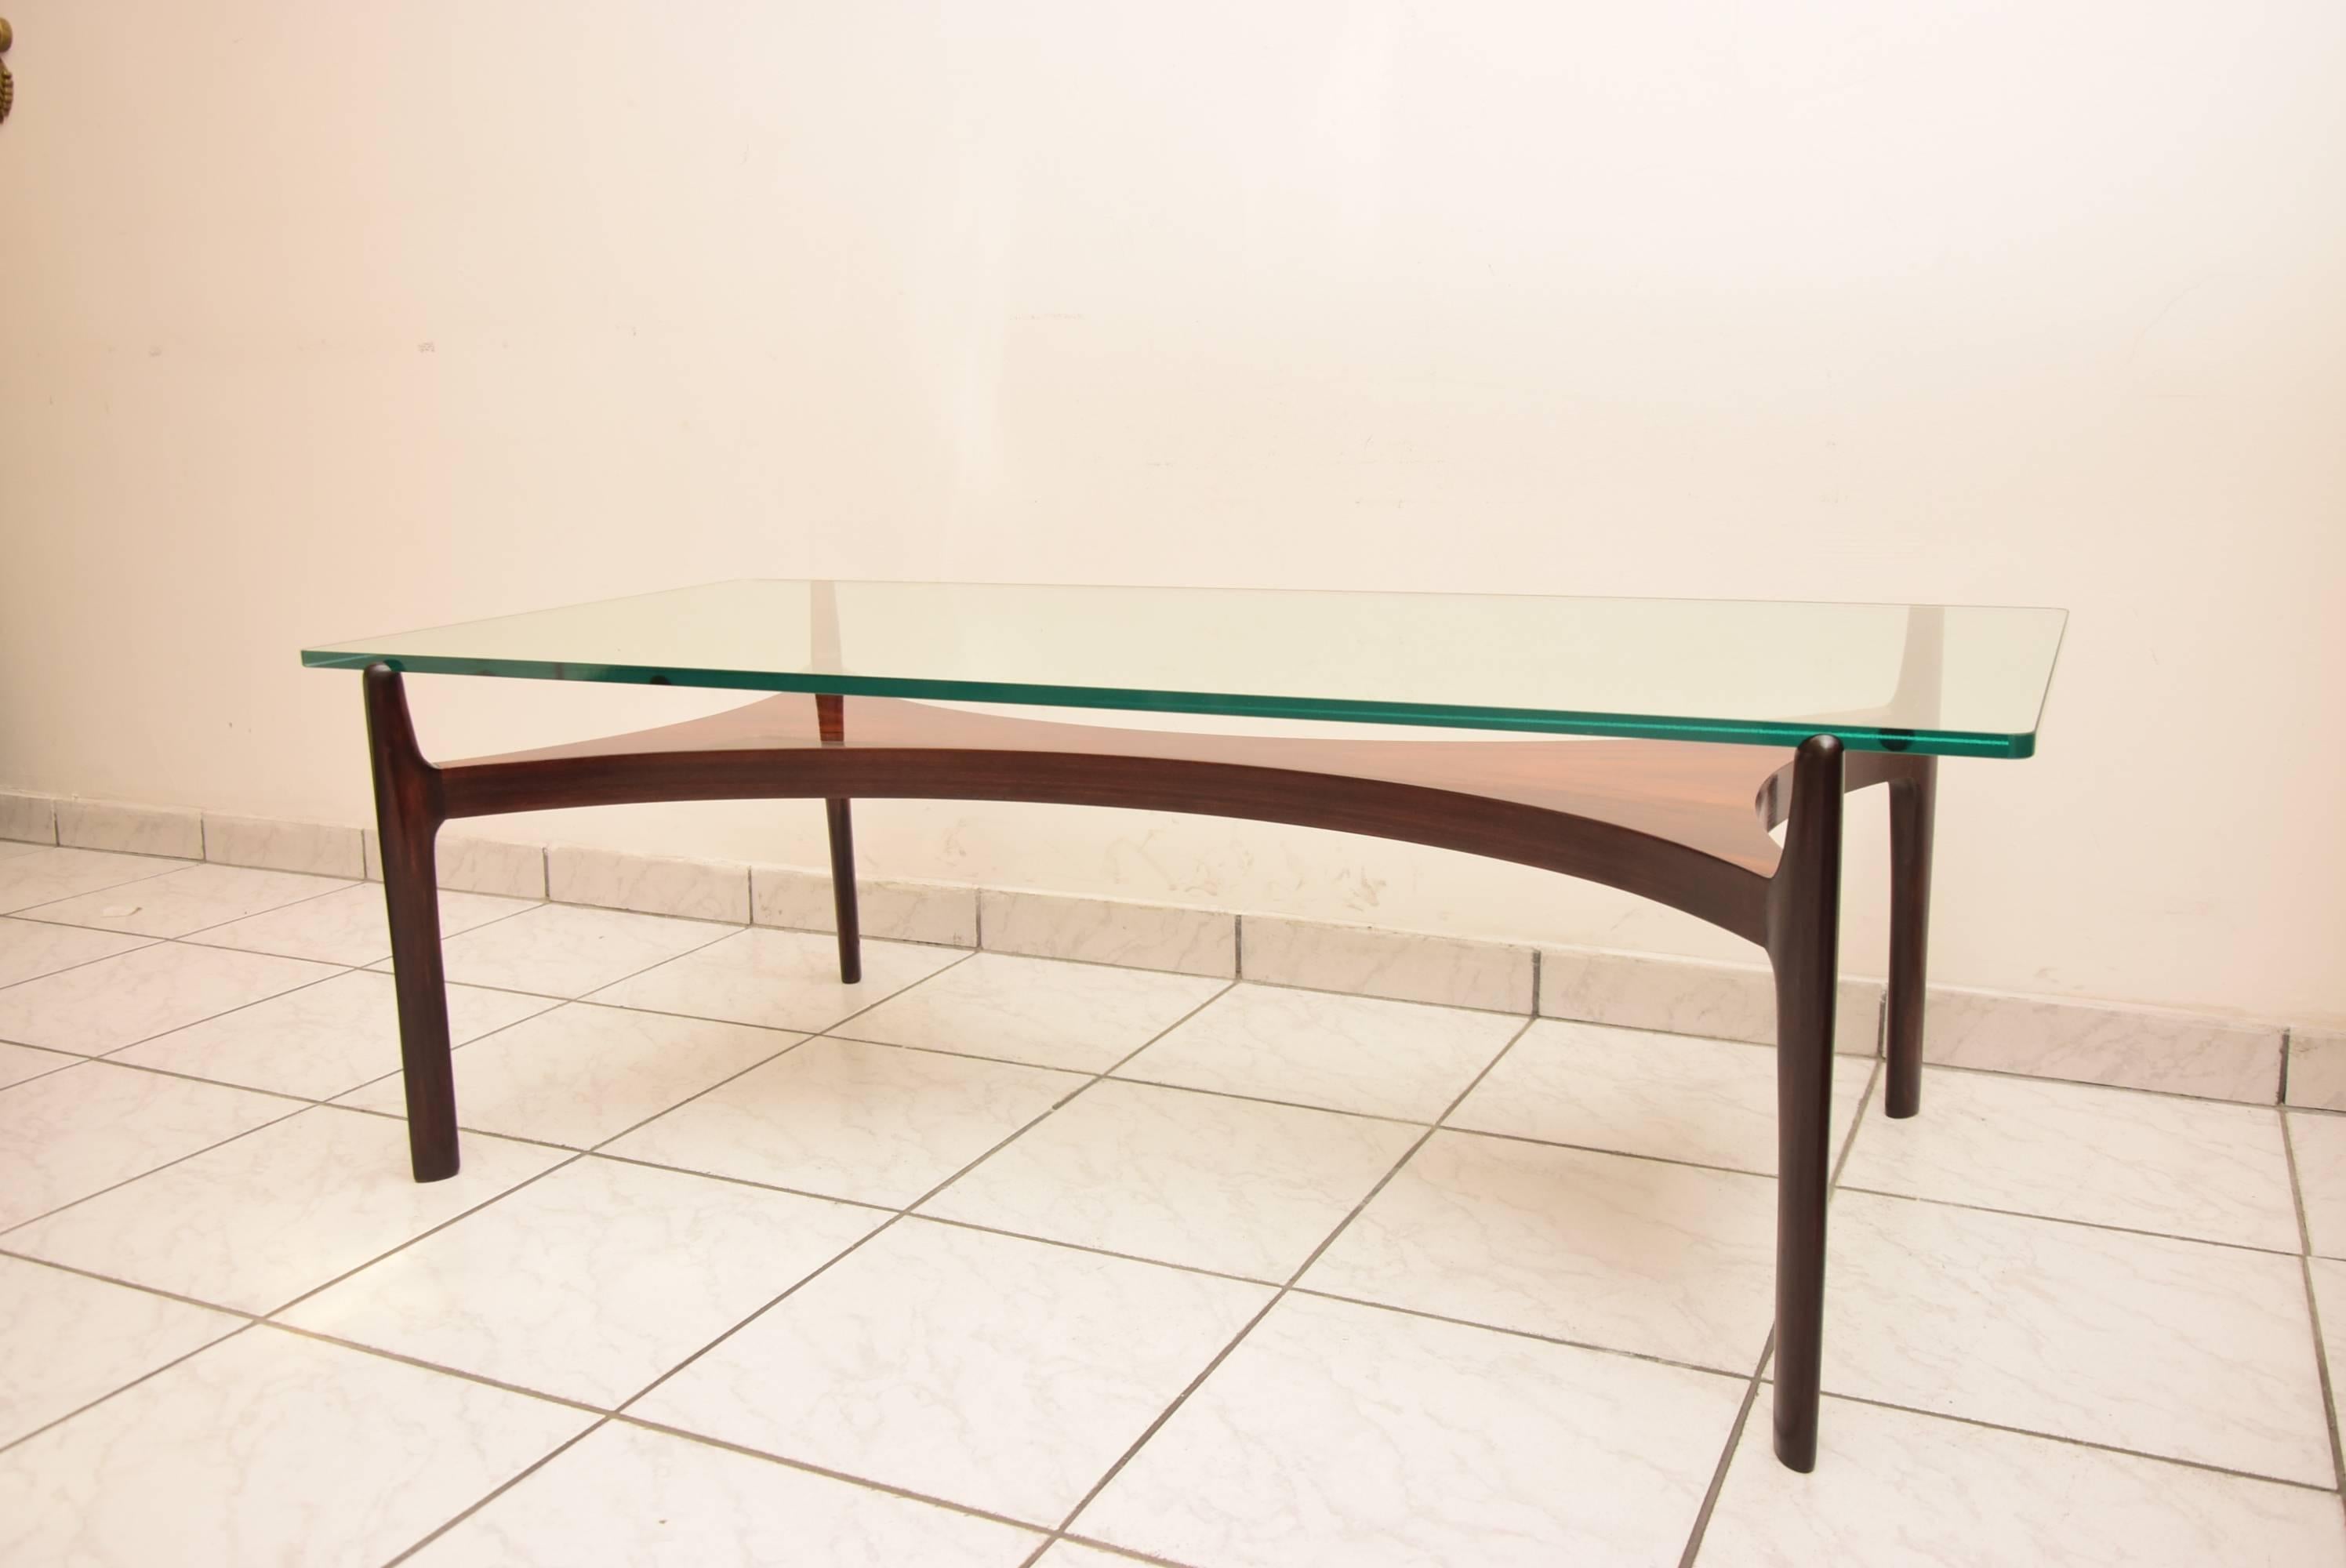 Rare rosewood and glass coffee table by Sven Ellekaer for Christian Linneberg.